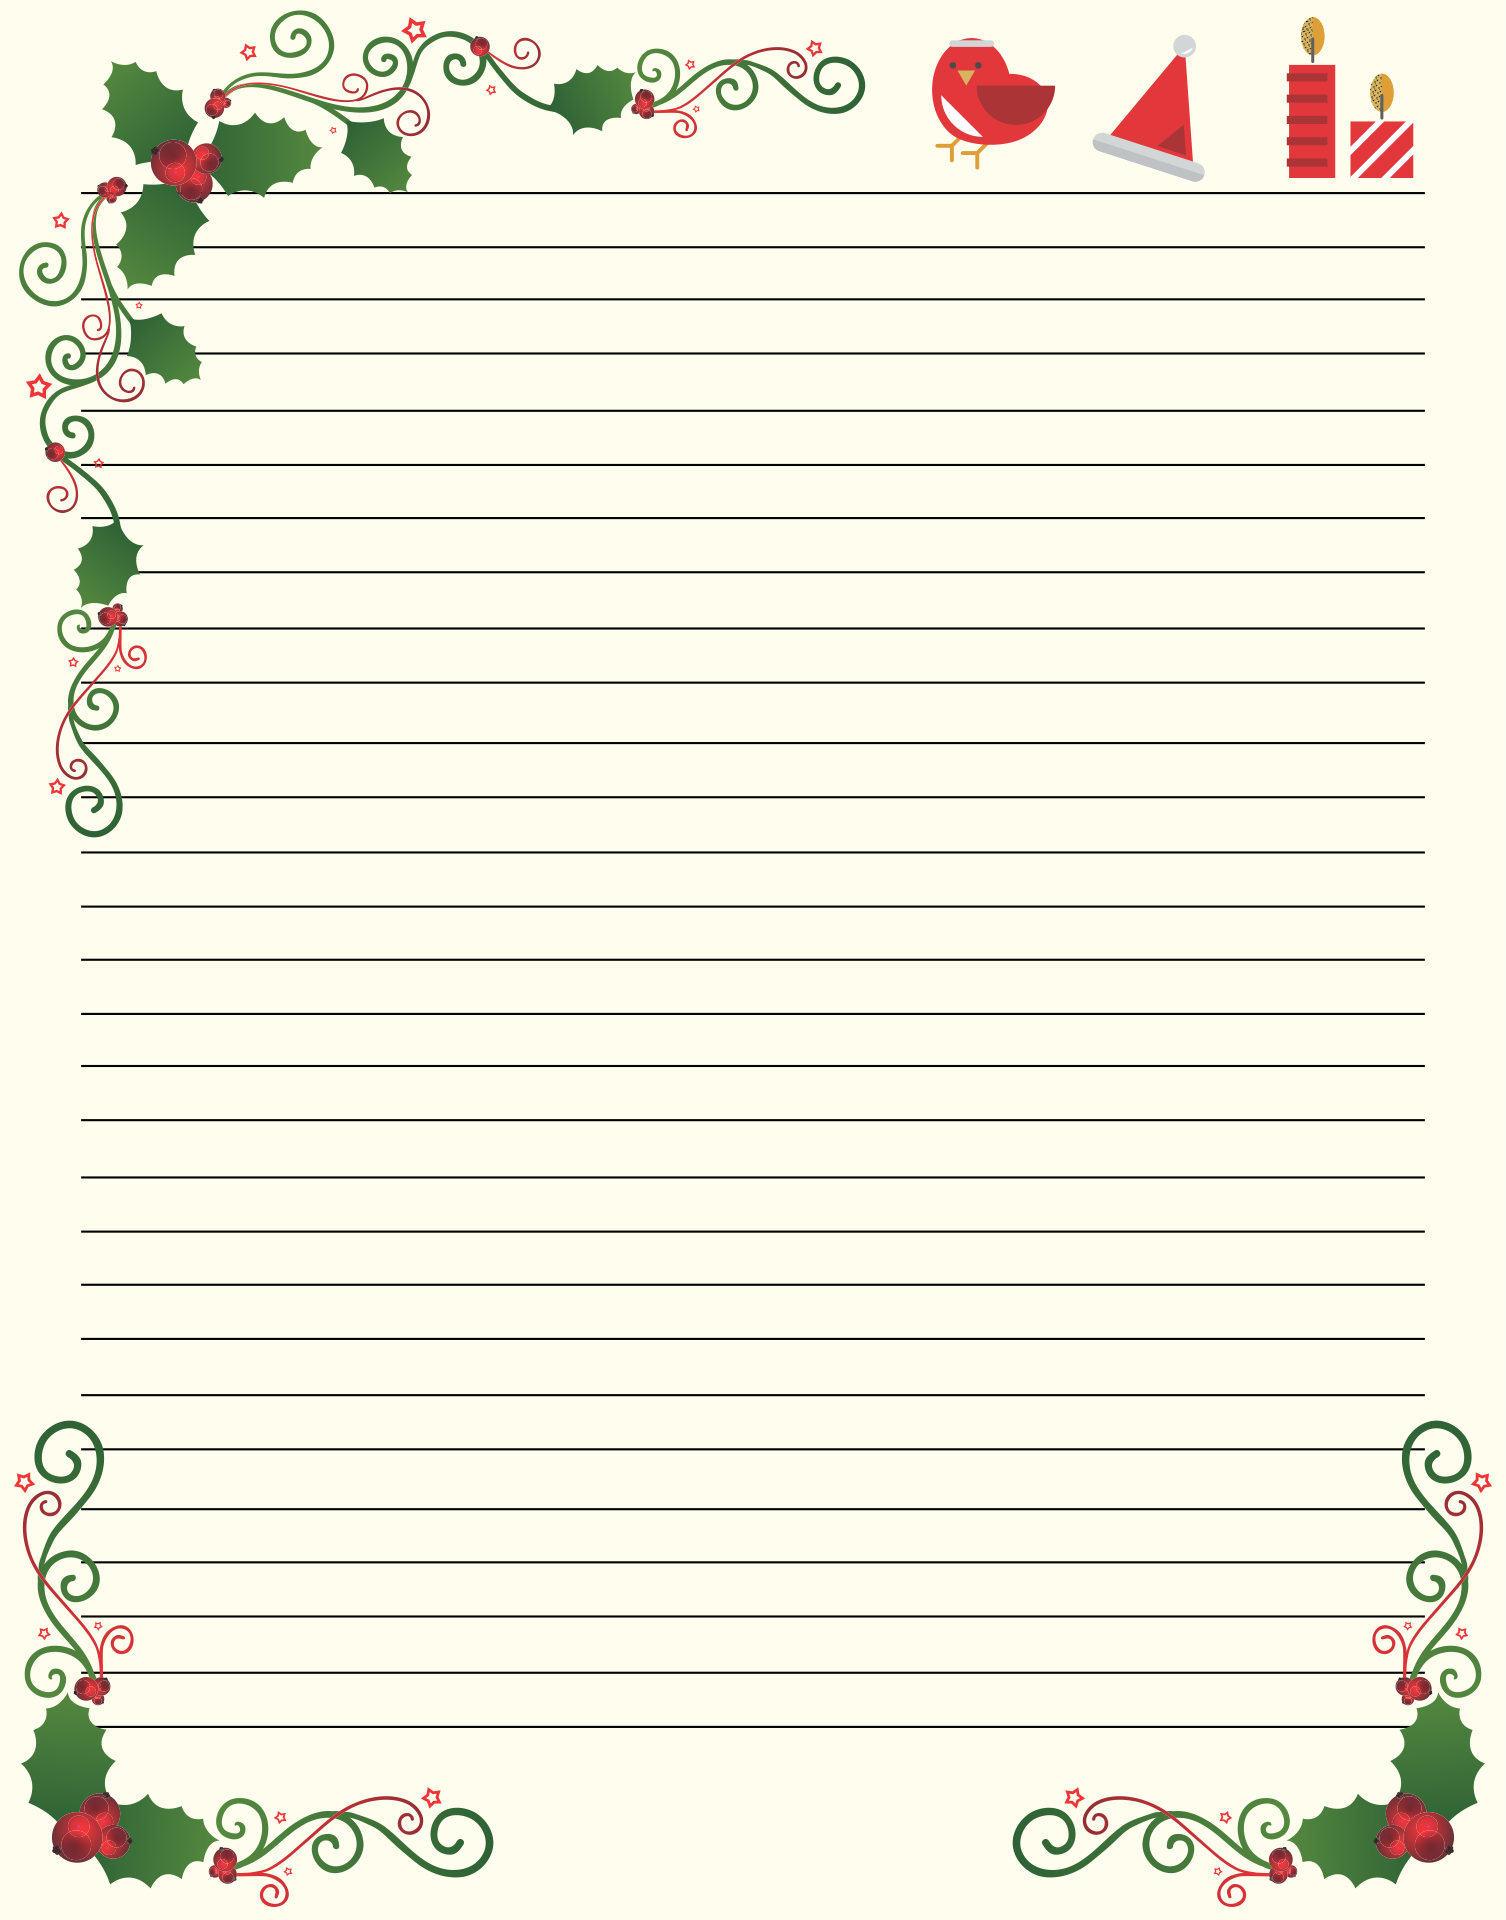 free-printable-stationery-customize-and-print